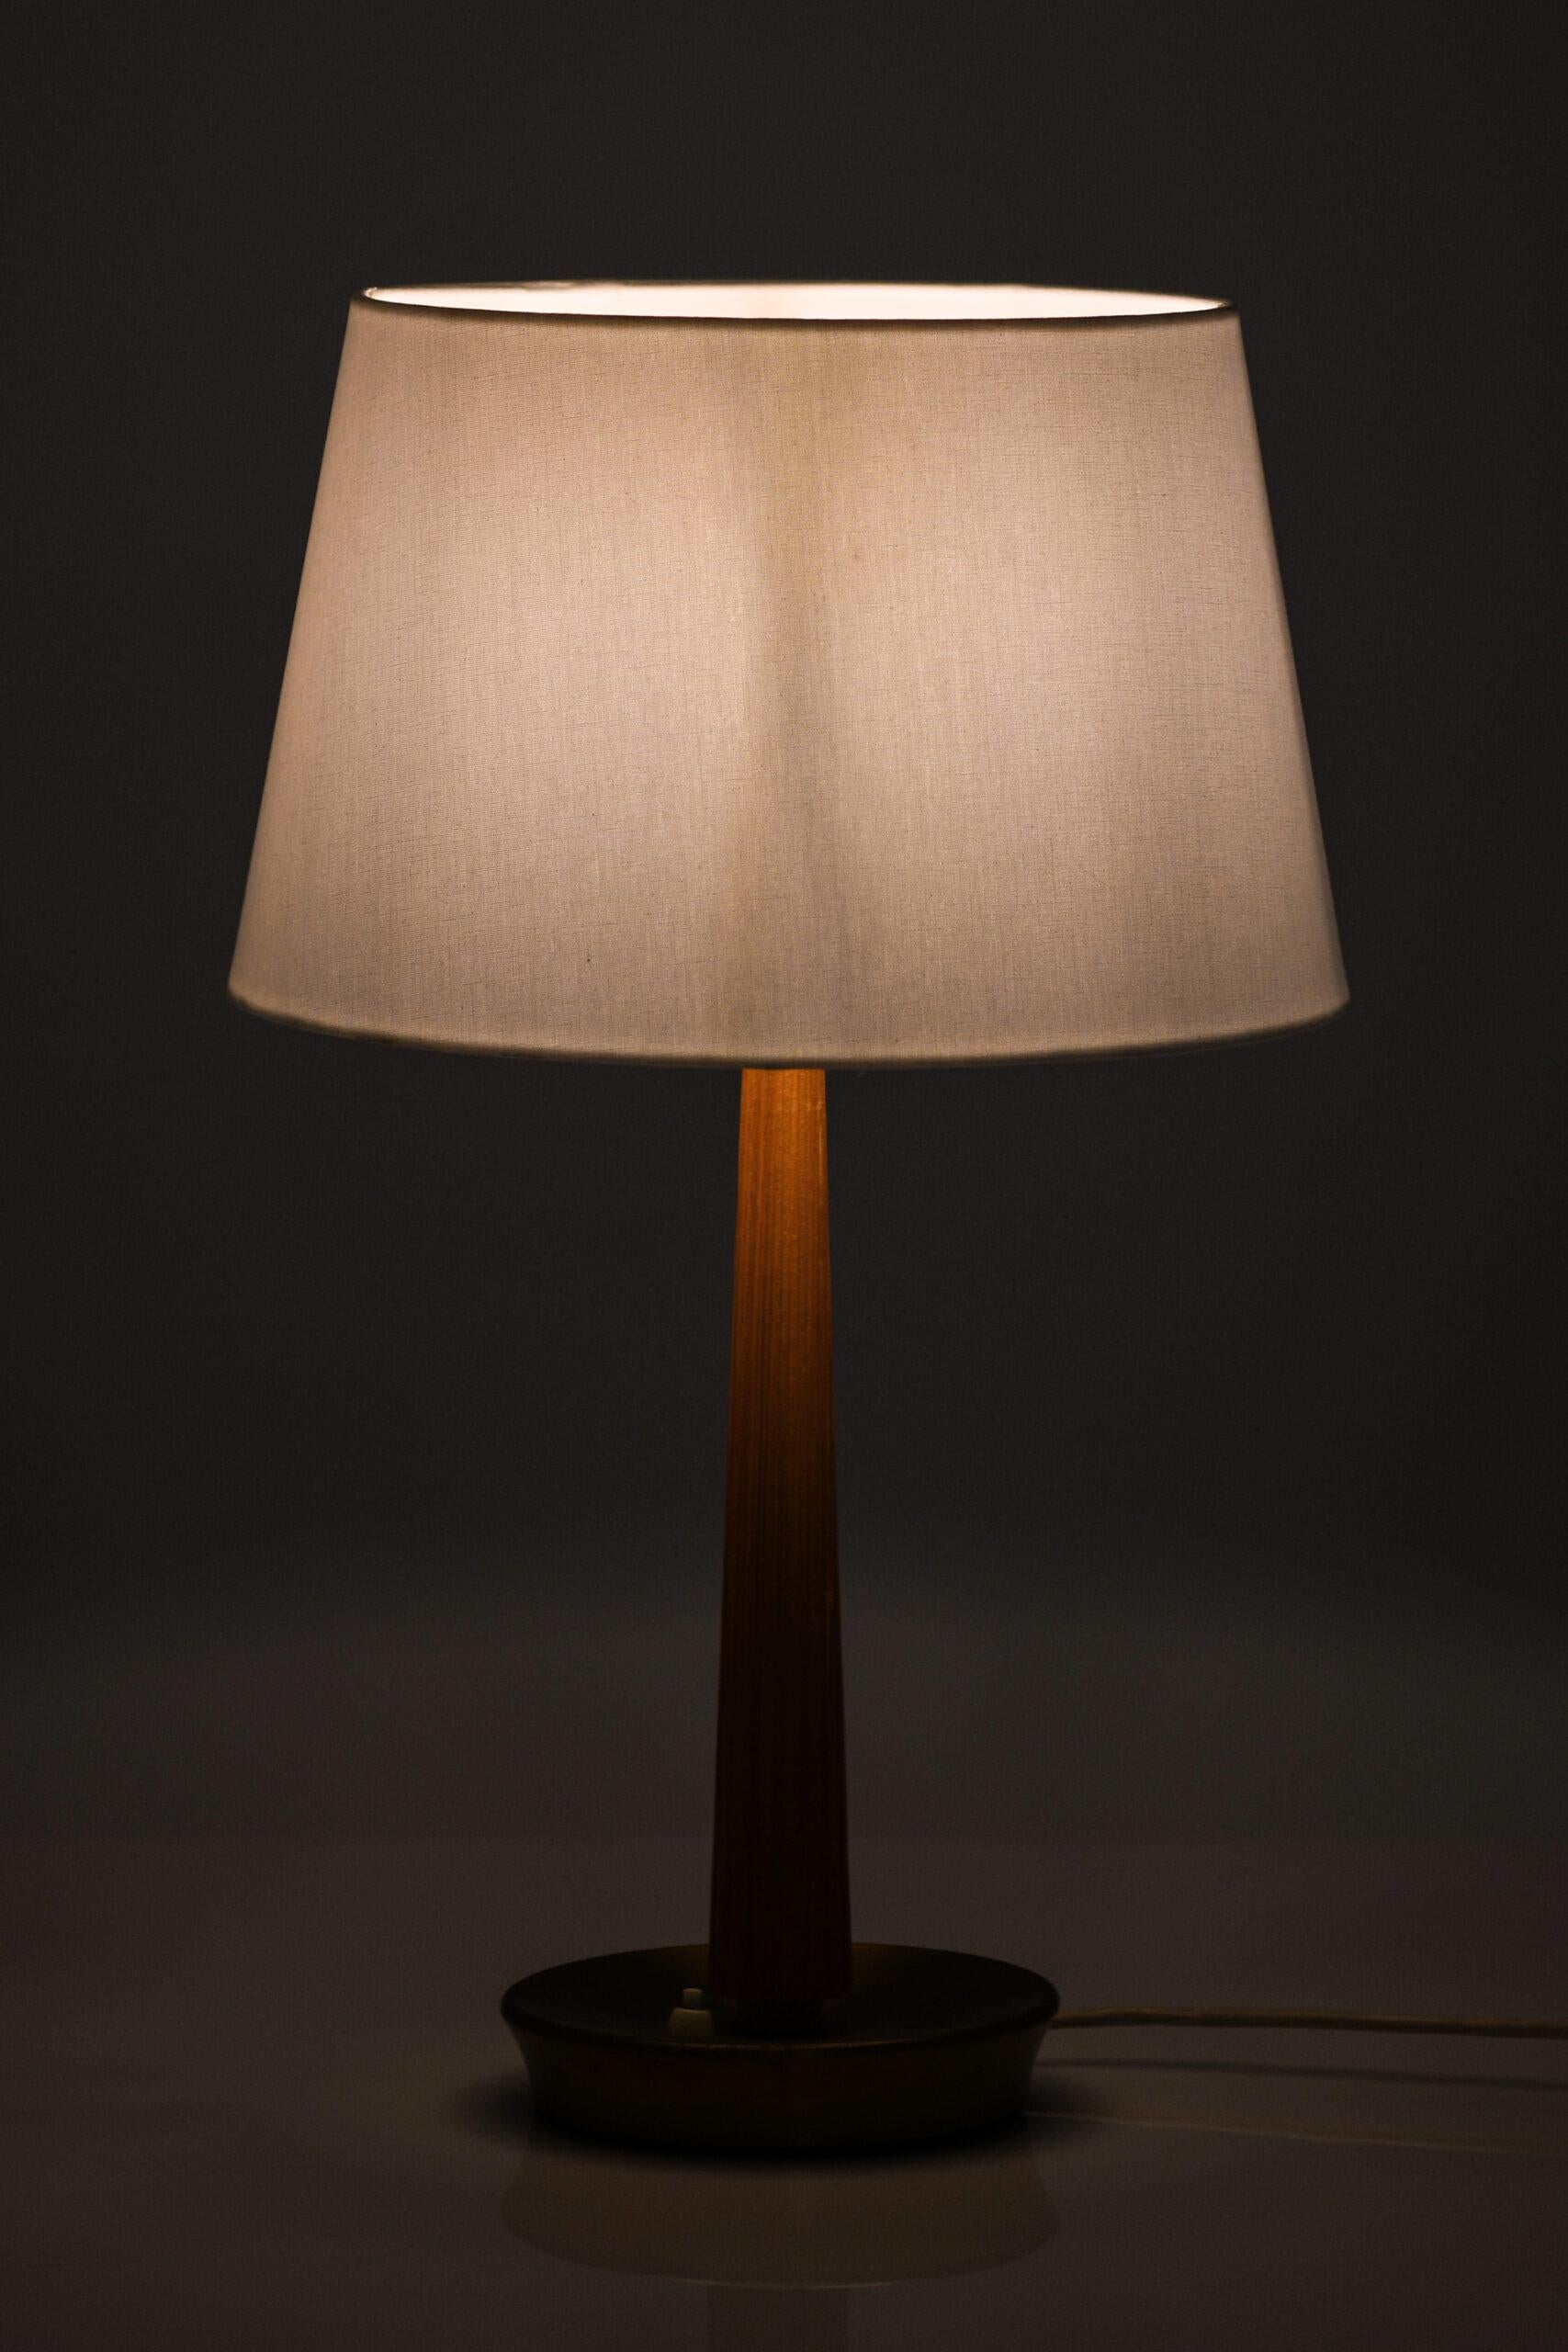 Hans Bergström Table Lamps Produced by ASEA in Sweden In Good Condition For Sale In Limhamn, Skåne län